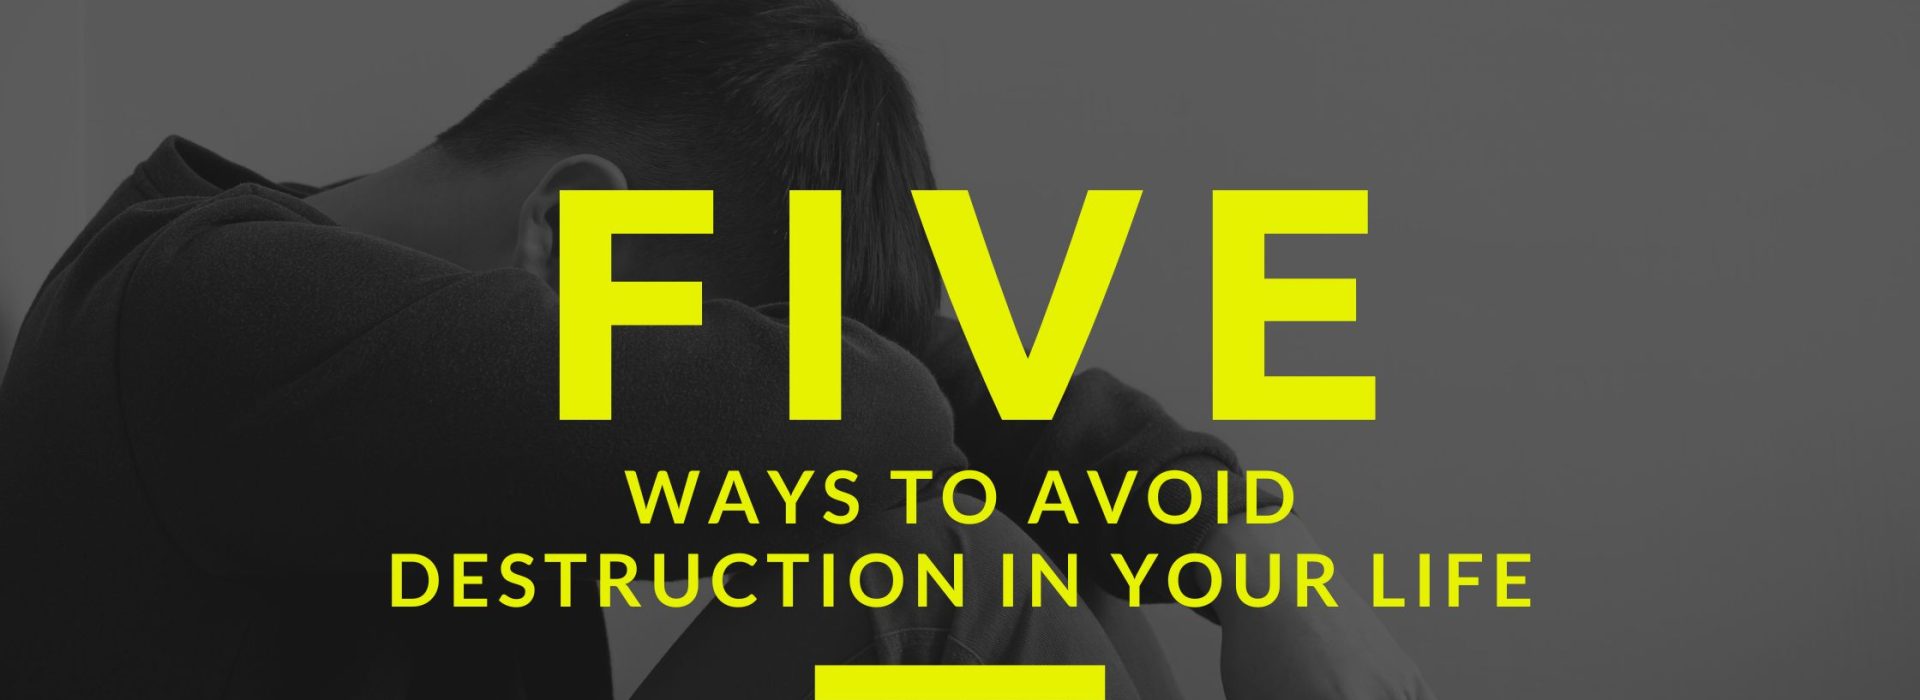 Five Ways to Avoid Destruction In Your Life